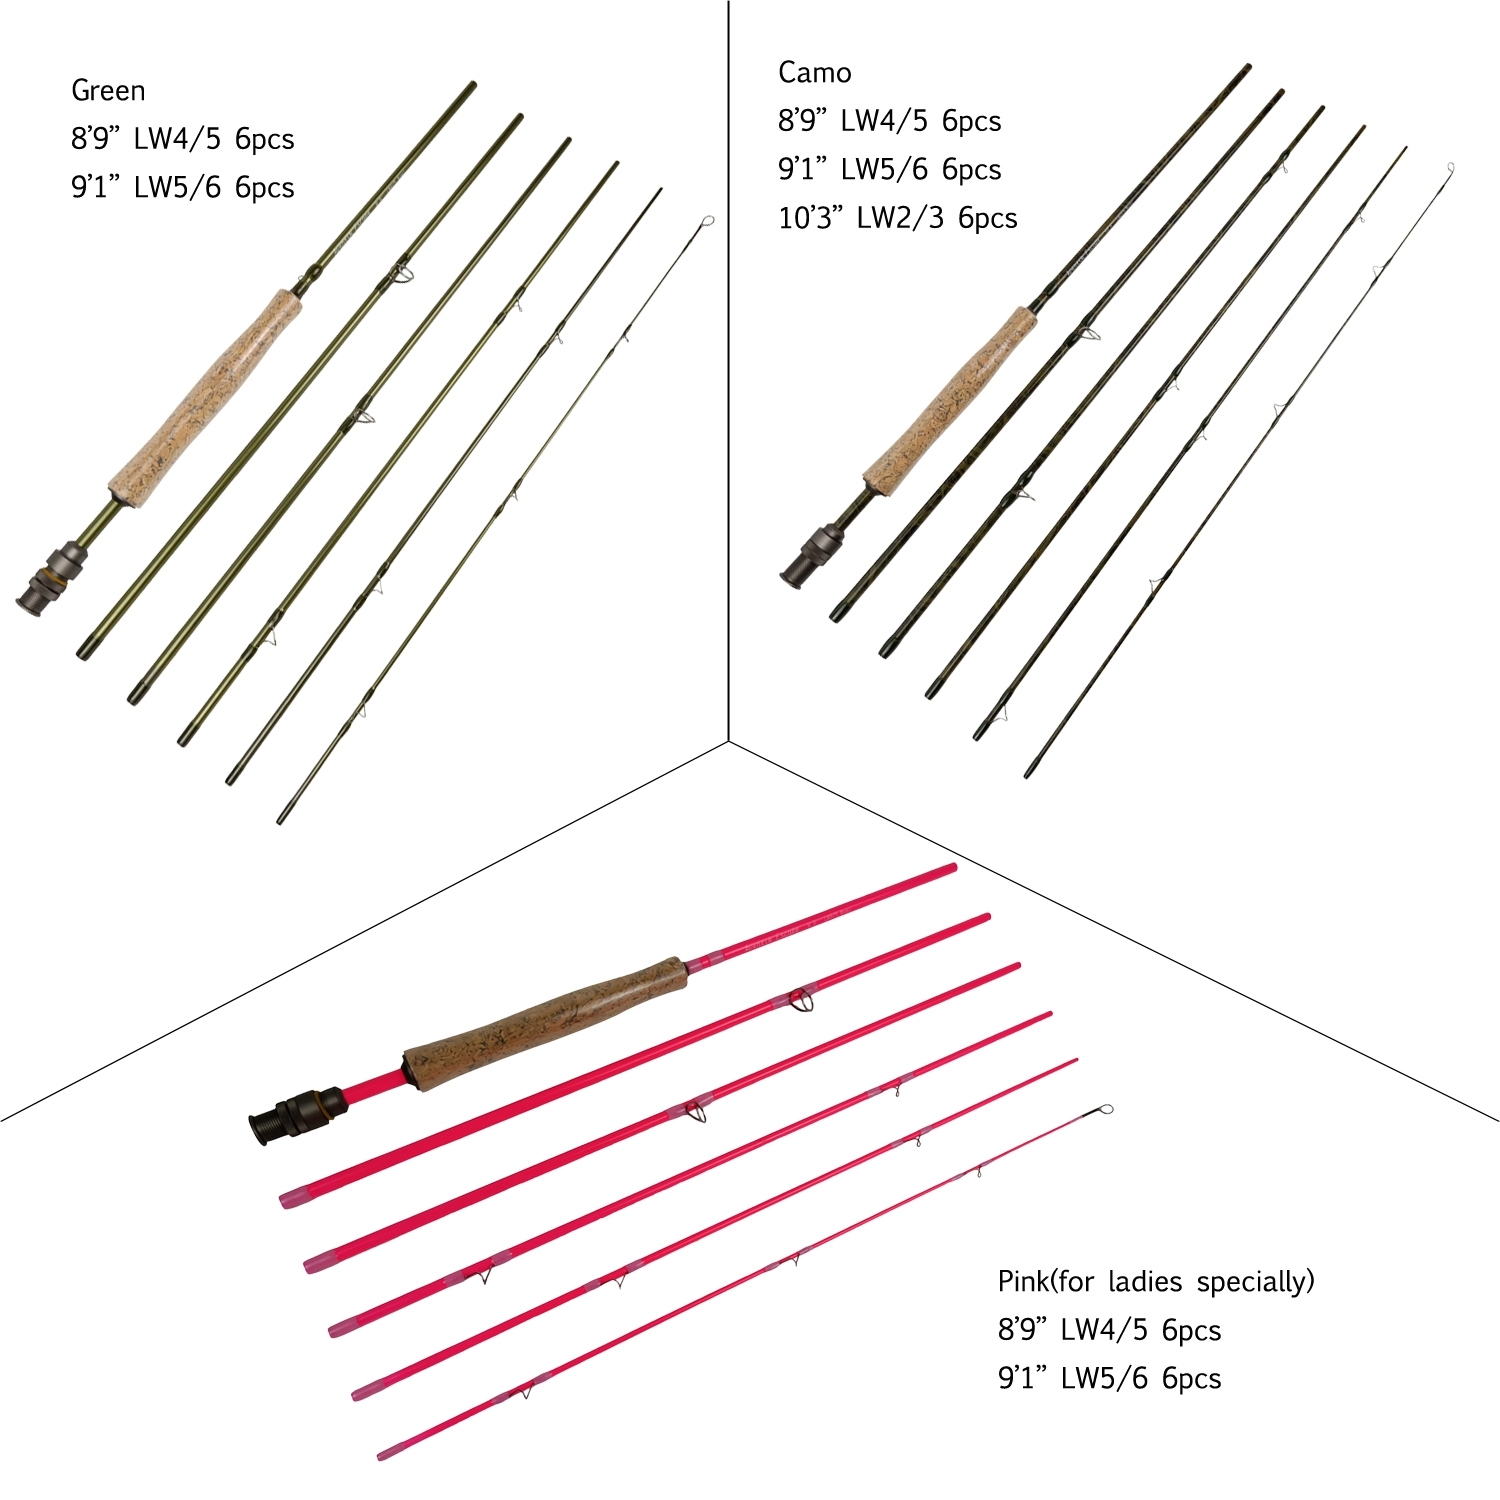 Aventik Economic 6 pieces Travel Fly fishing rods 8'9” LW4/5, 9'1'' LW5/ 6, 10'3” LW2/3, Pink for Ladies